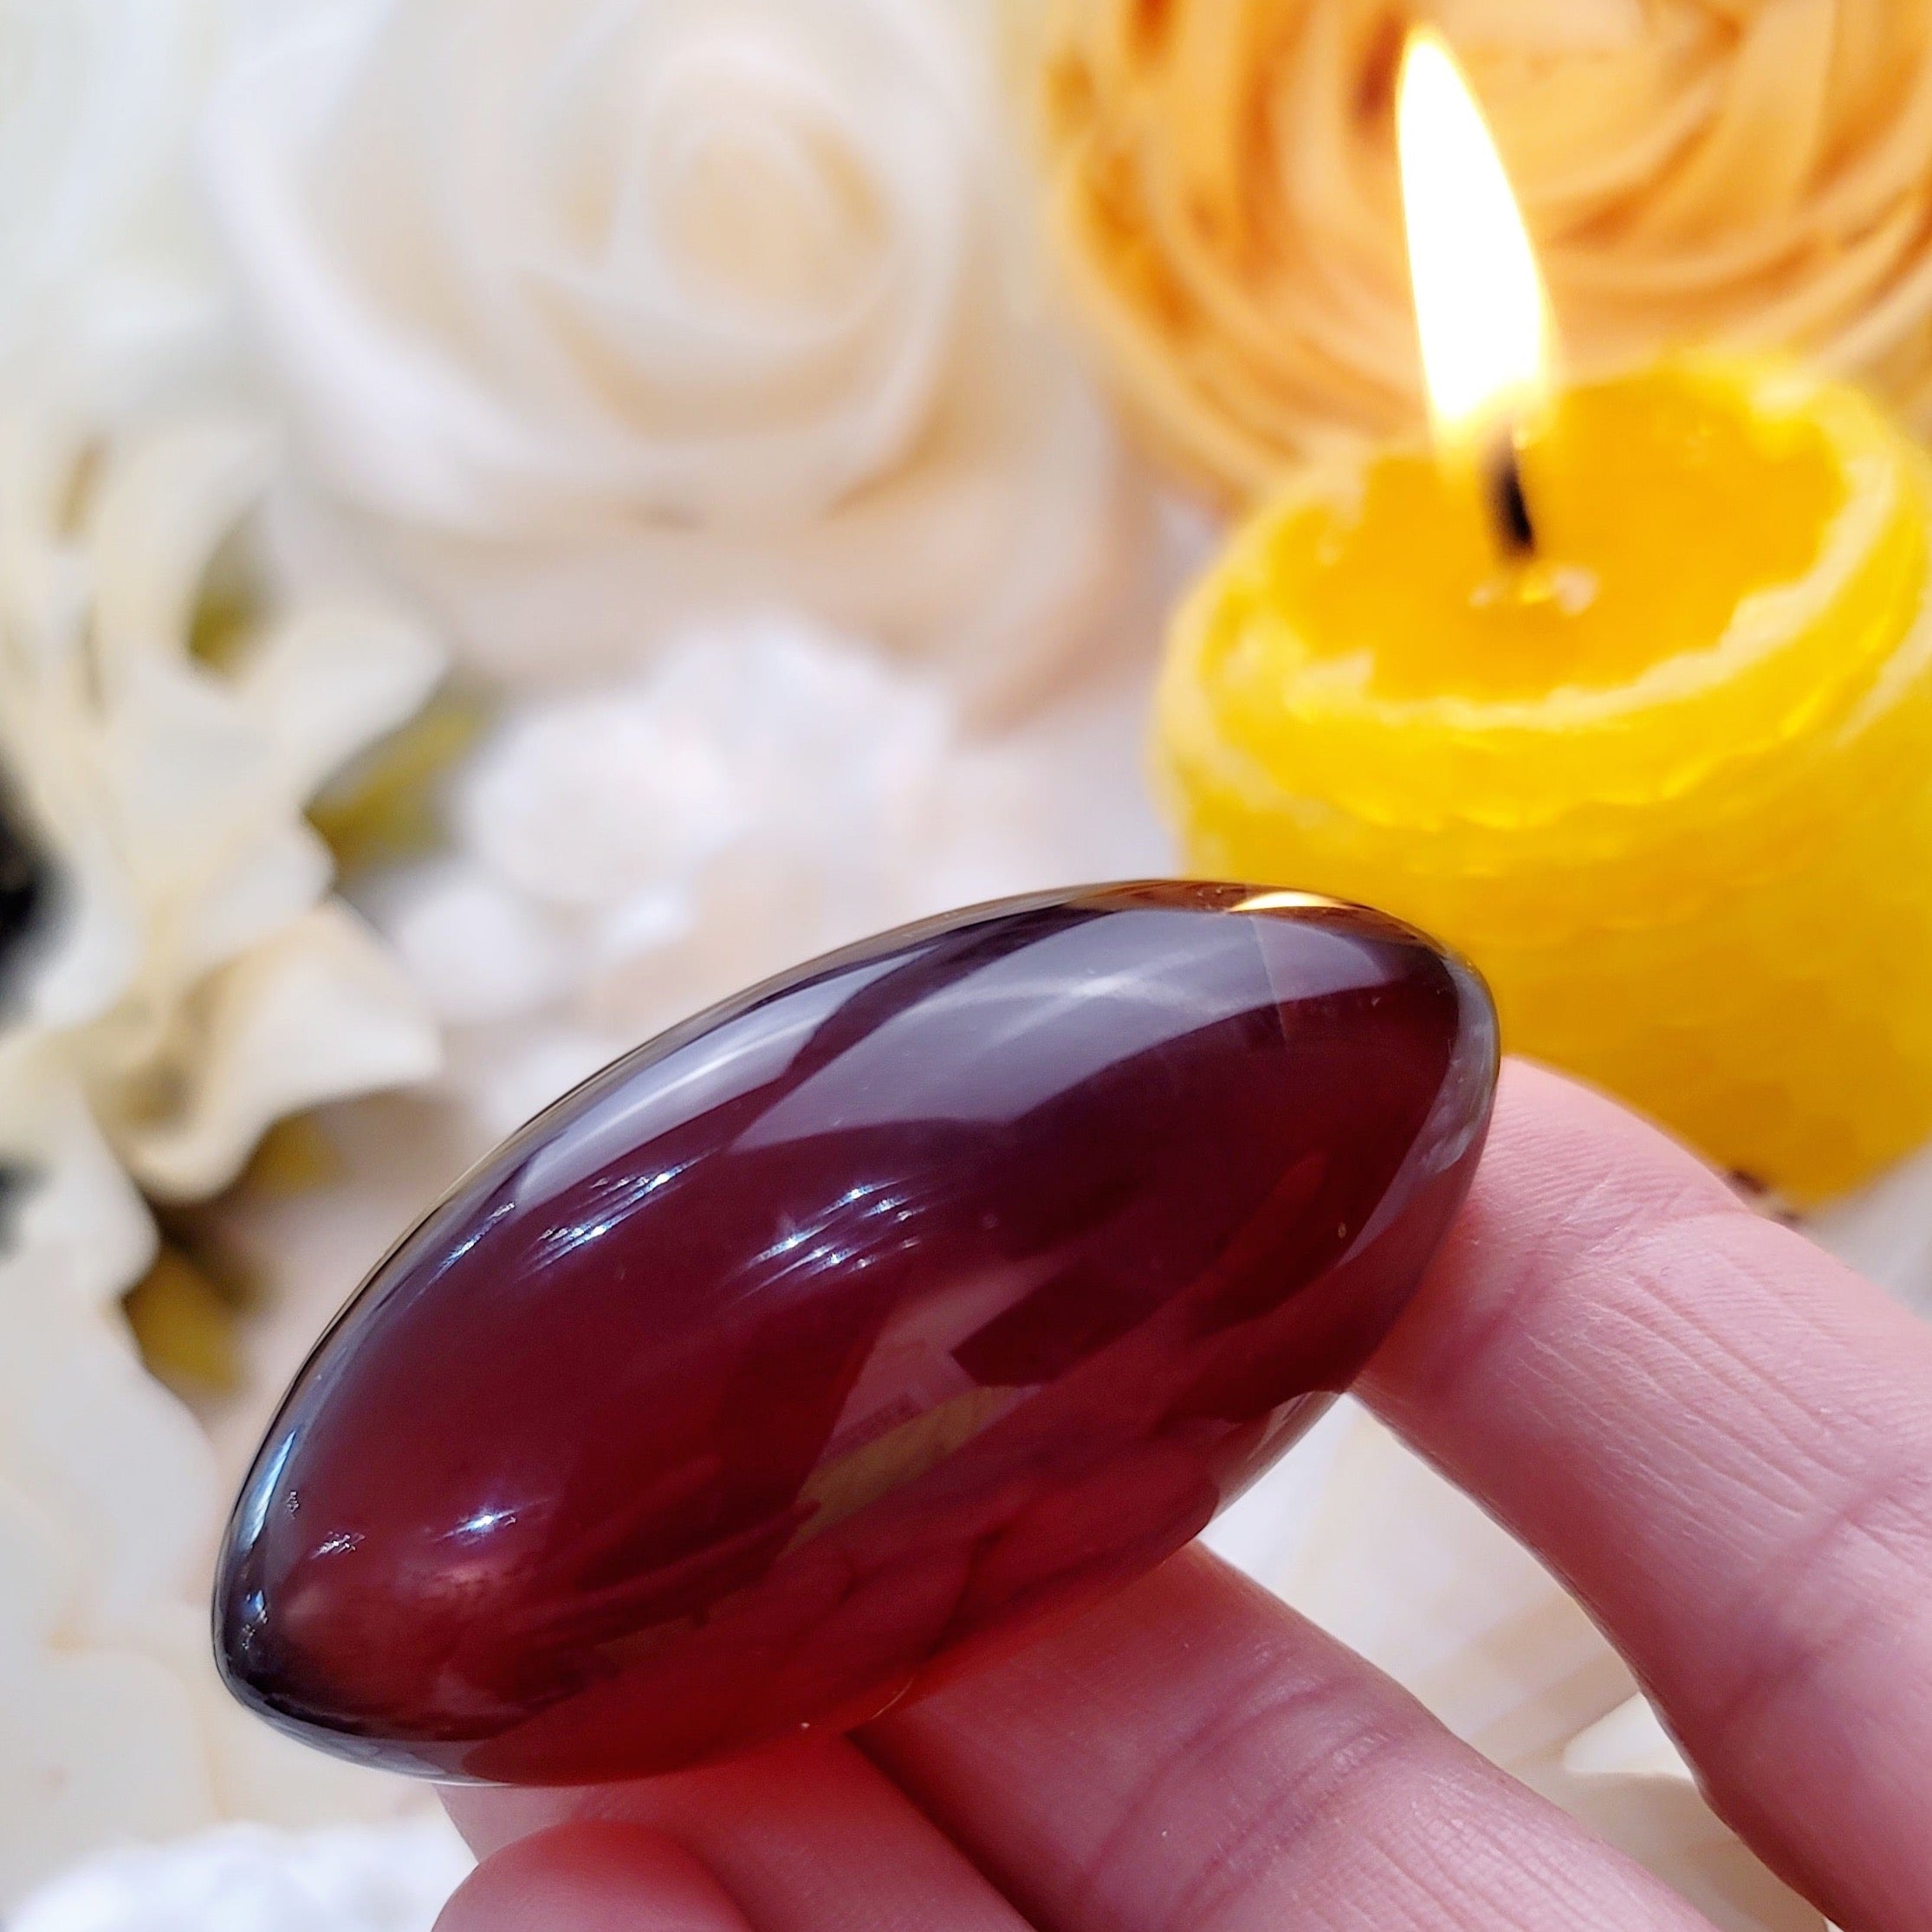 Amber Shiva for Healing, Joy and Protection